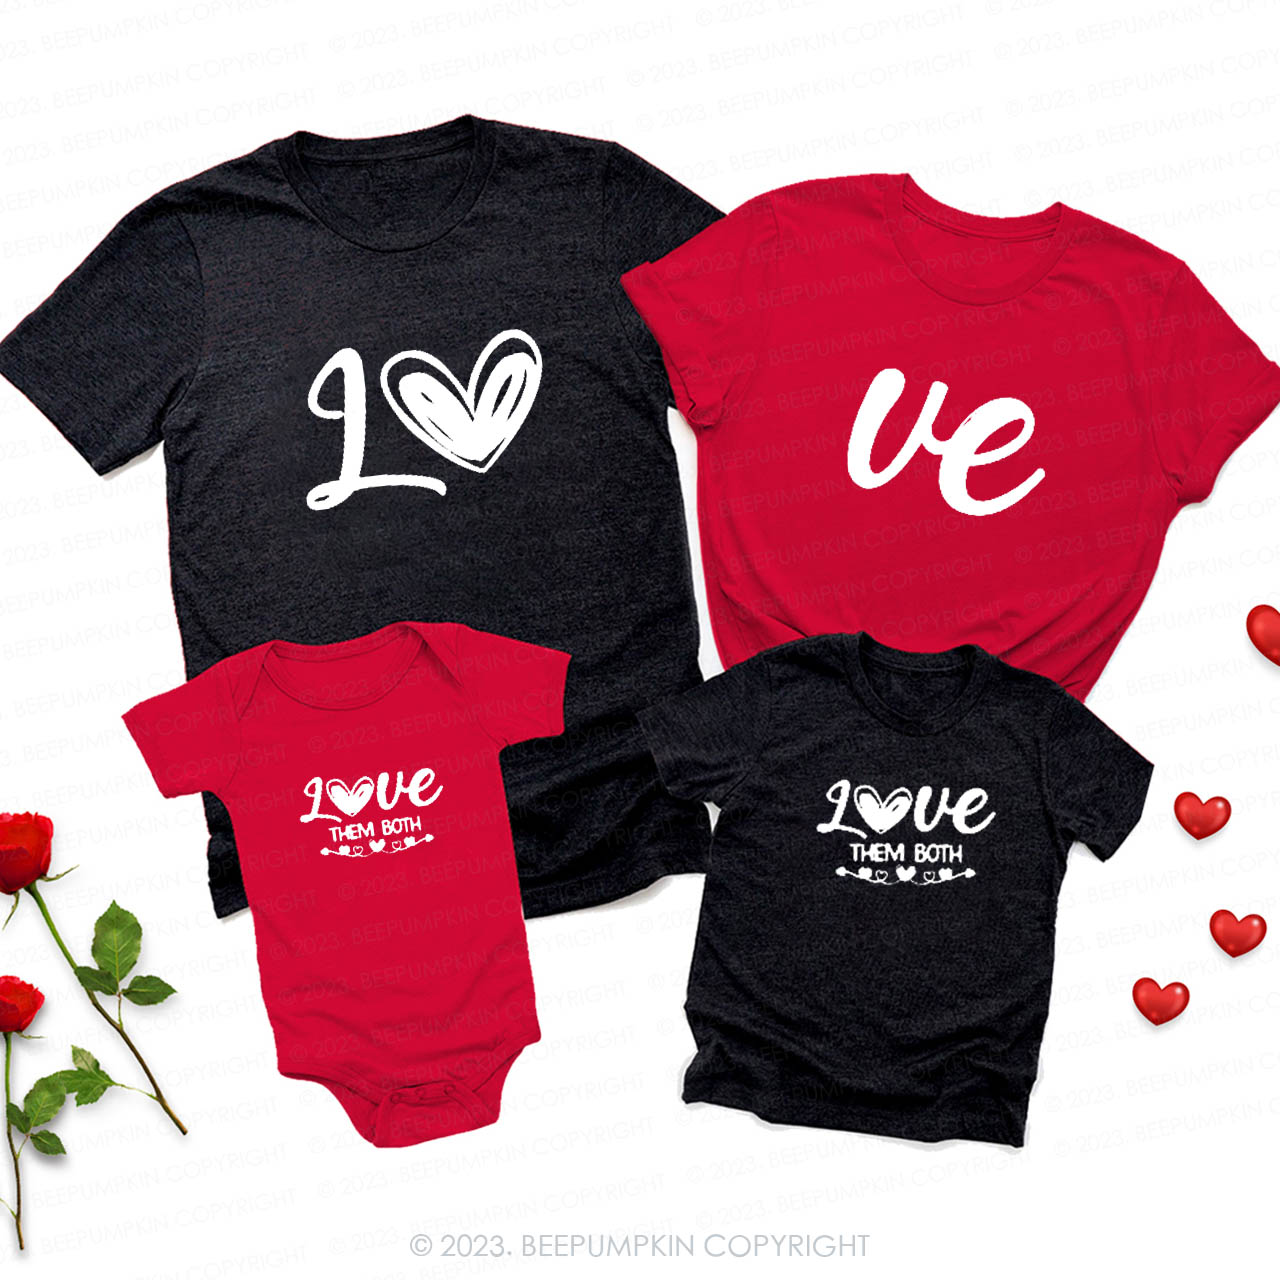 Let Love Fill Every Corner of the World Family Matching Shirts